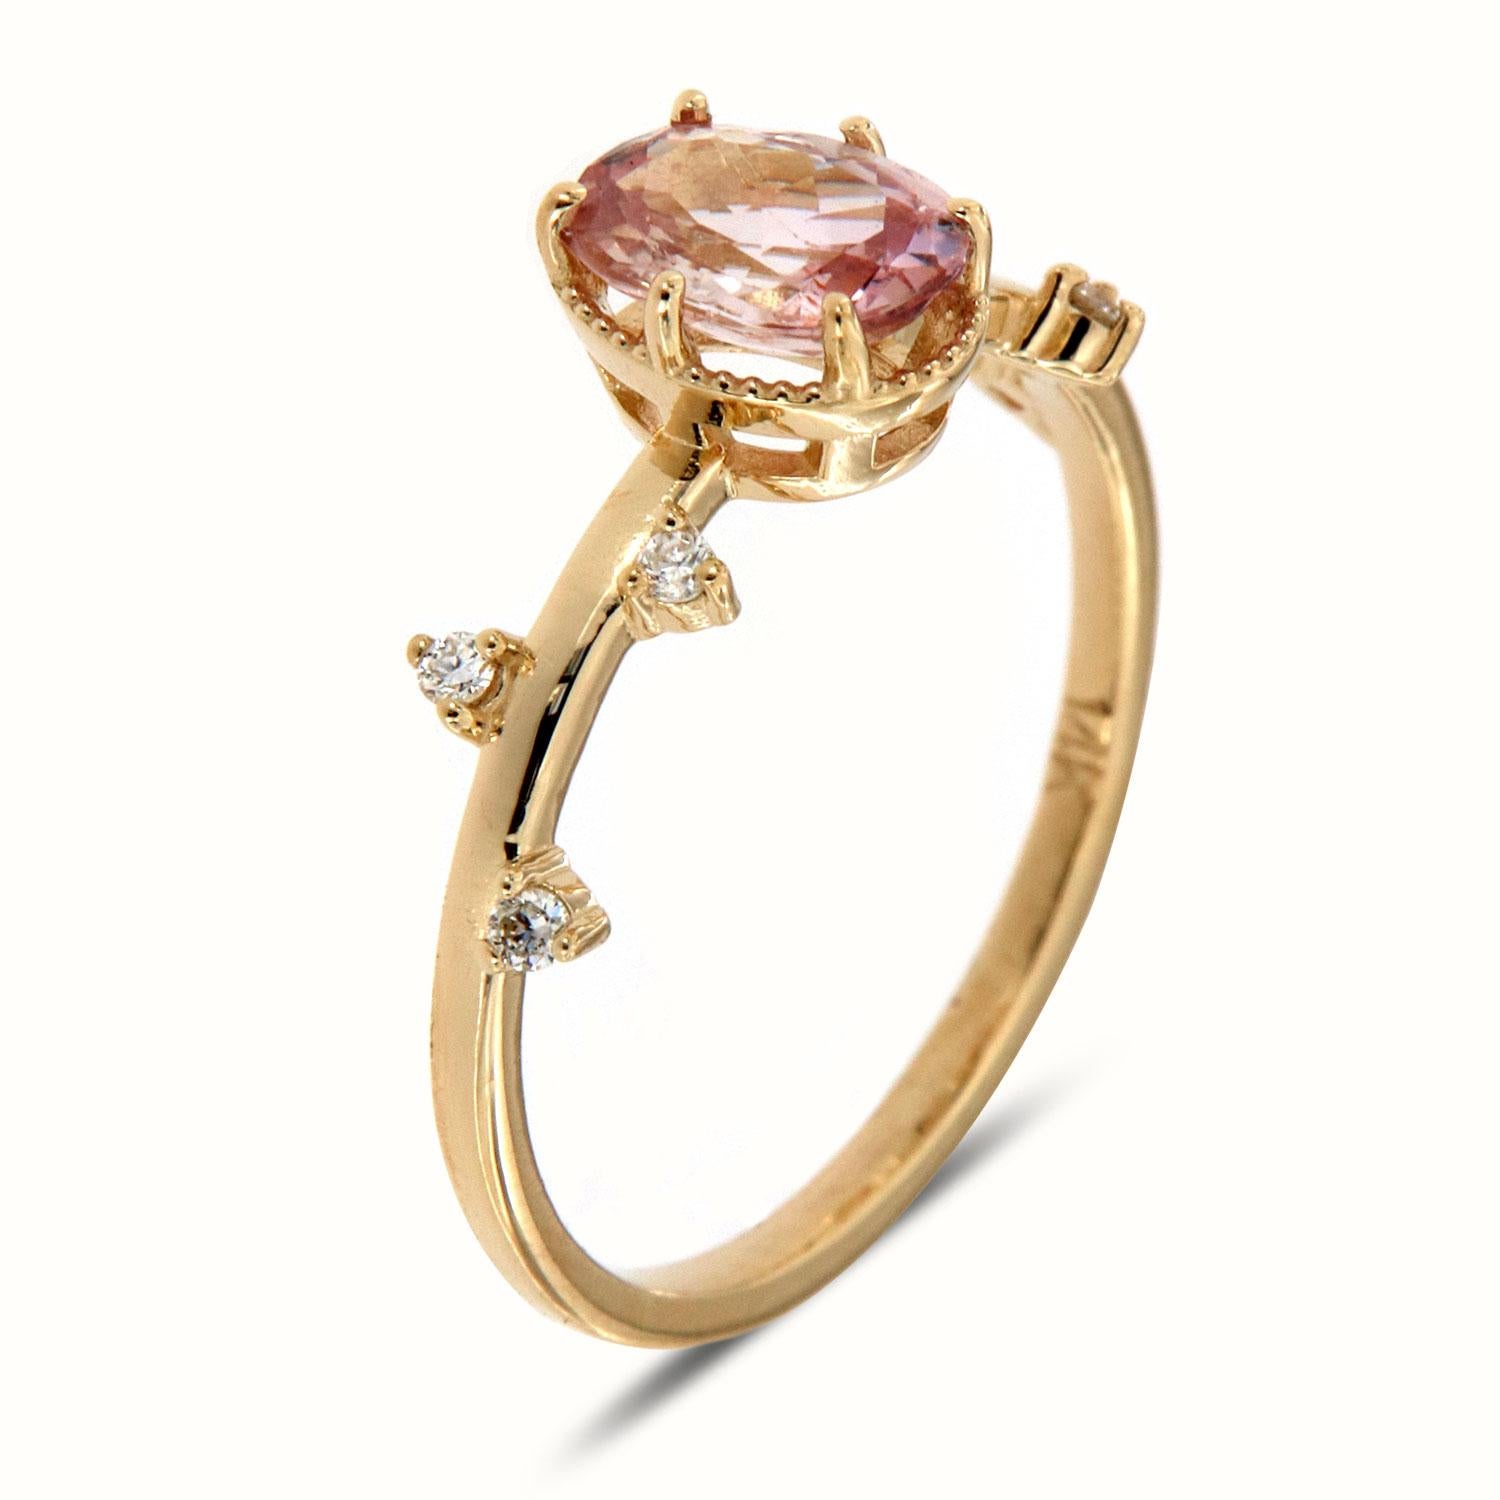 This organic design Delicate Ring features a 0.90 carat Oval shaped Peach color Unheated Sri-Lankan Sapphire set between six (6) tiny prongs surrounded by a light migrain design. Six (6) Round brilliant unevenly scattered on top of a 1.3 mm band.